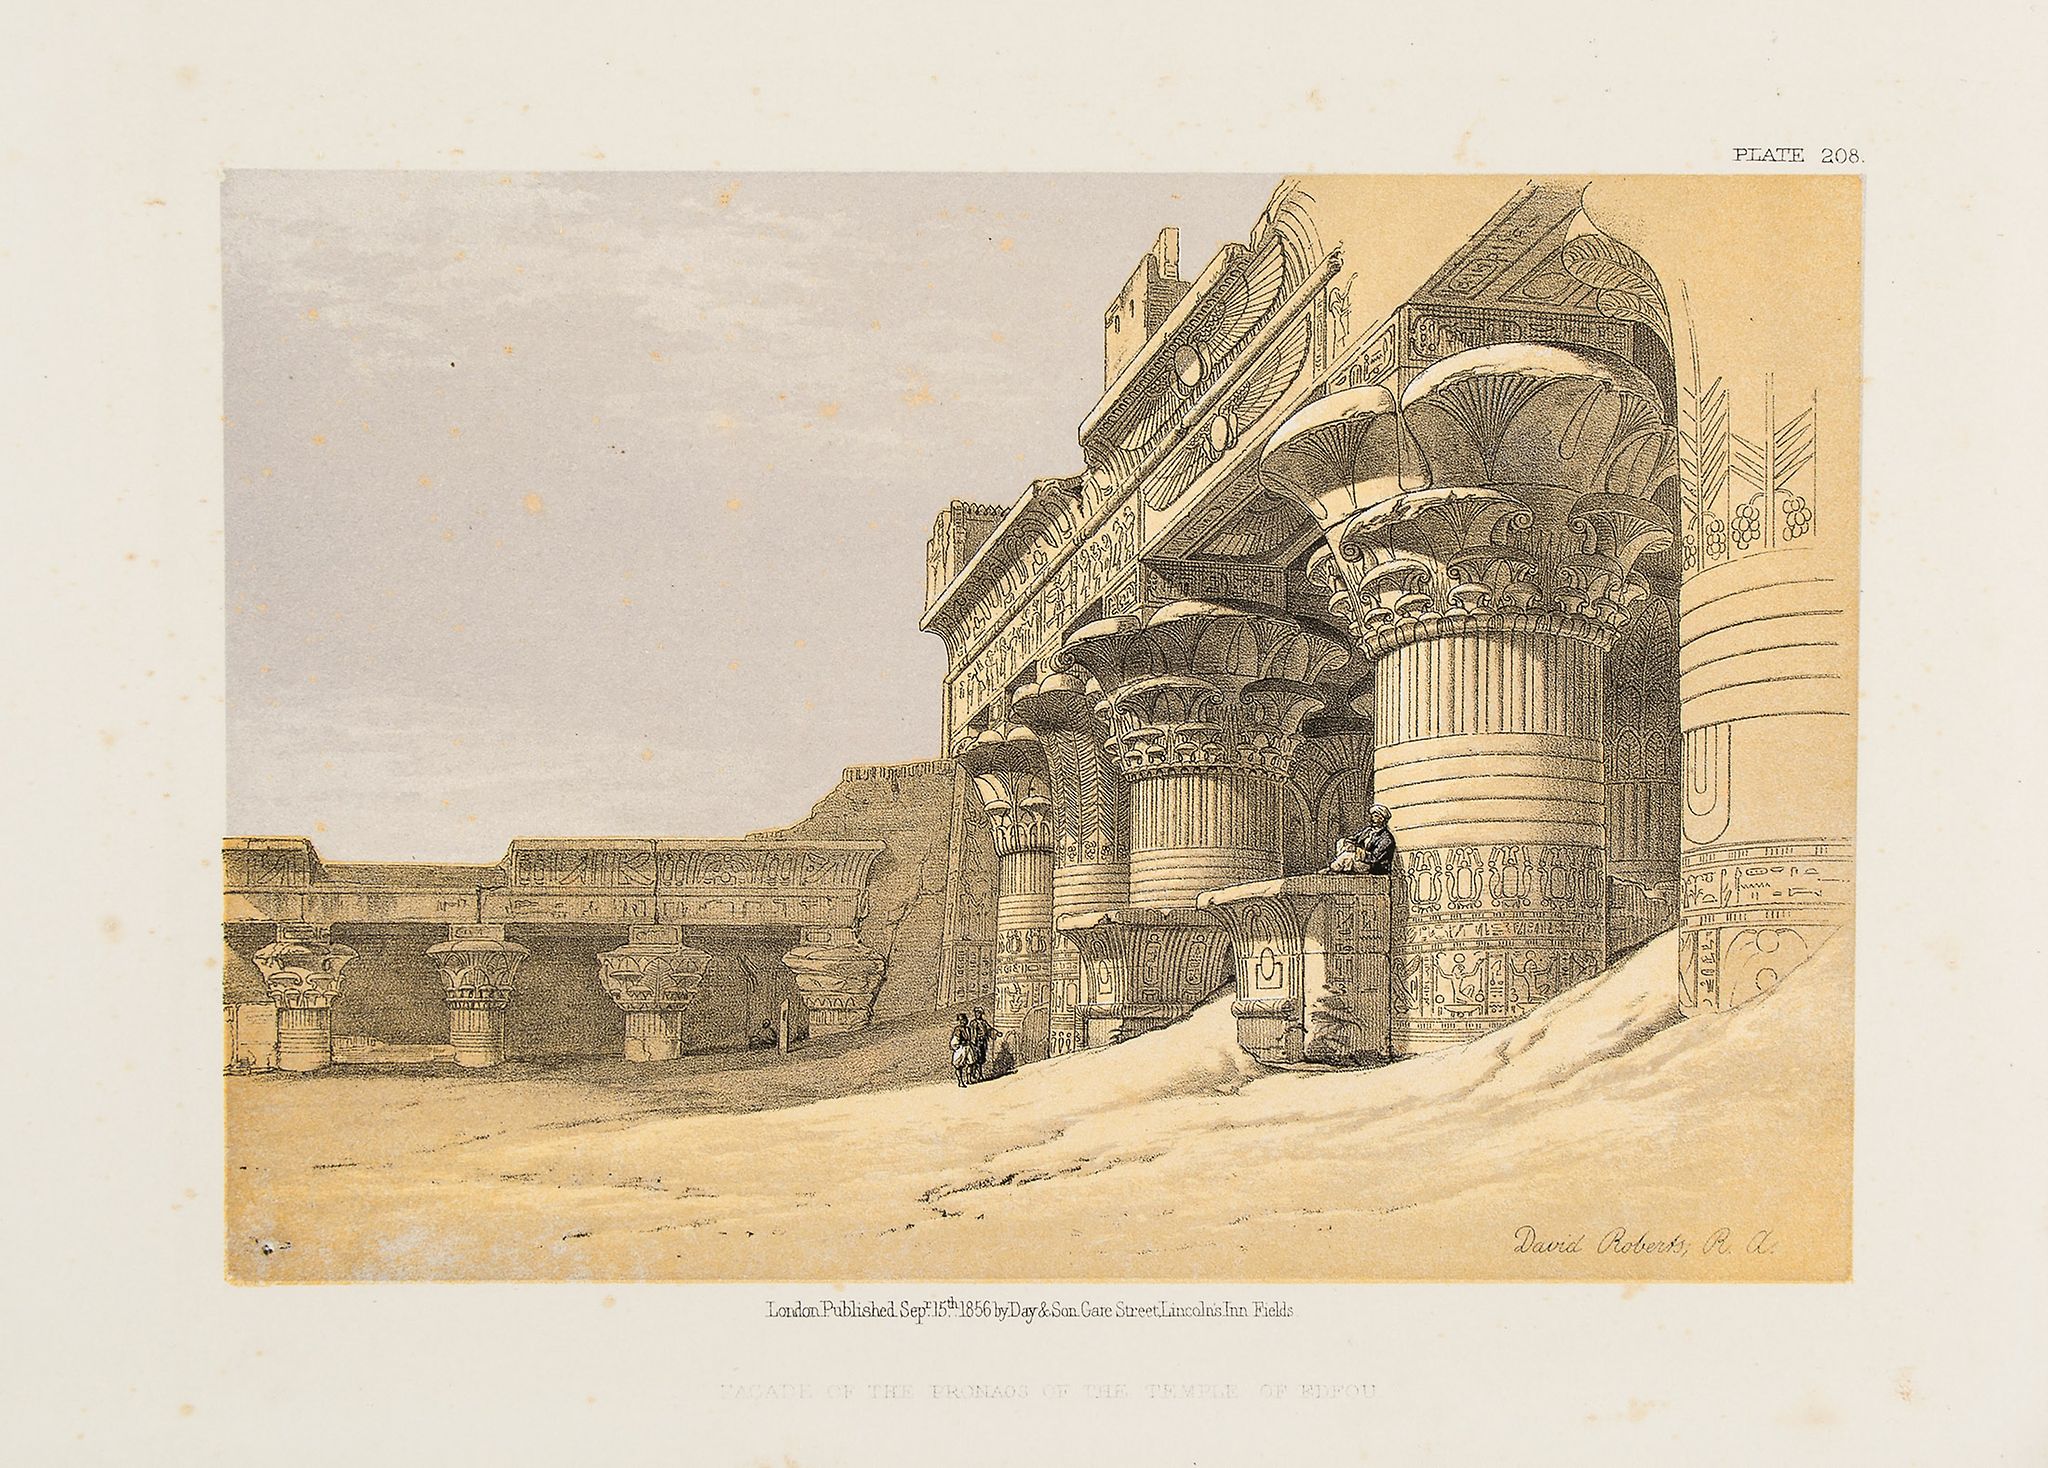 -. Roberts (David) - [Eygpt and the Holy Land], 85 reduced plates from 2 separate additions,  tinted